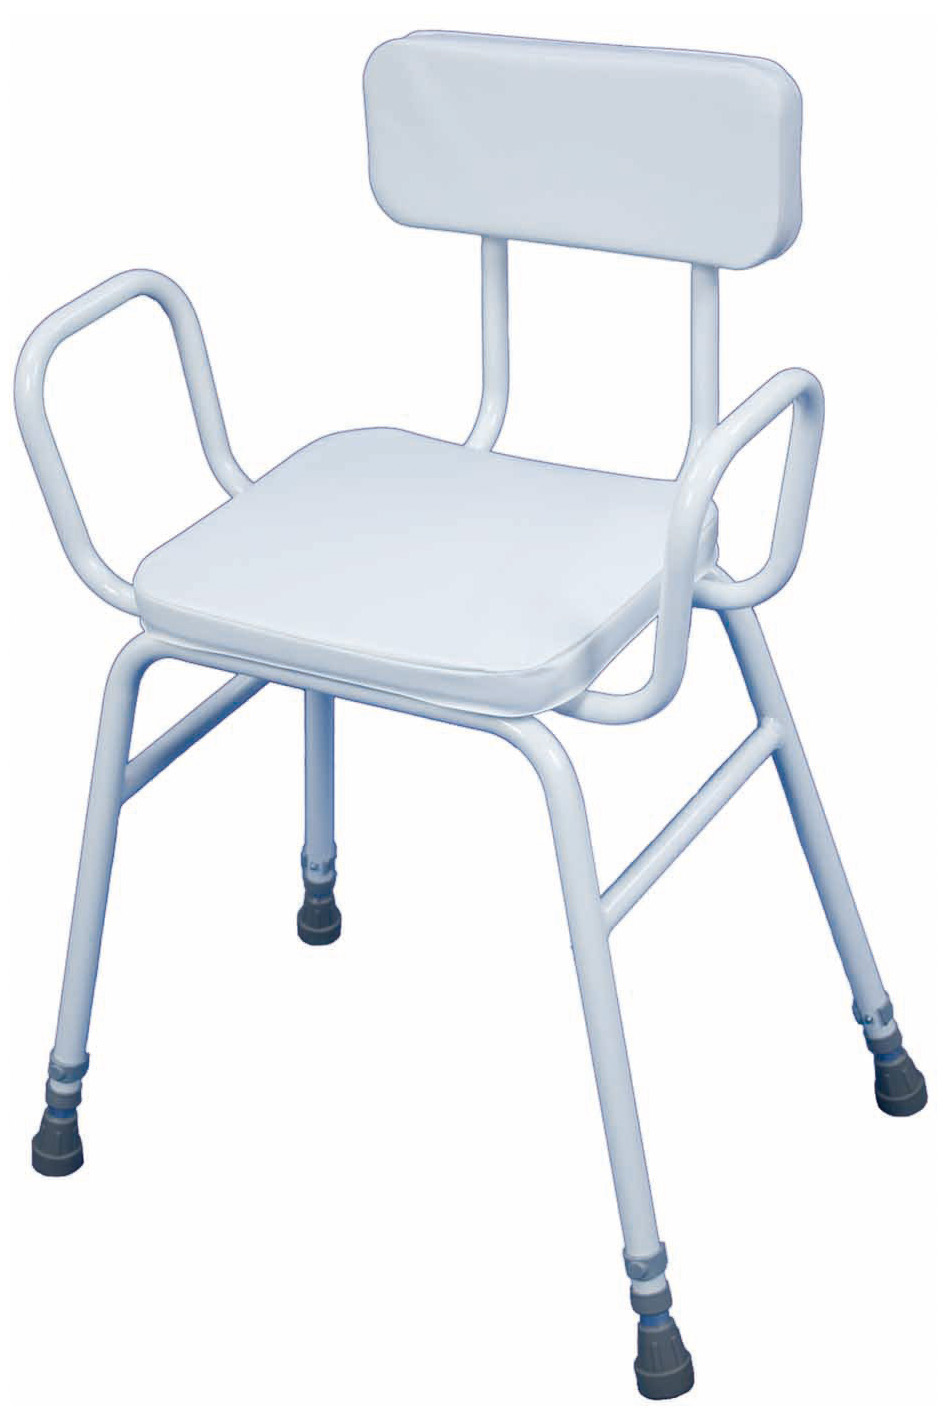 Malling Perching Stool With Arms, Plain Back Rest